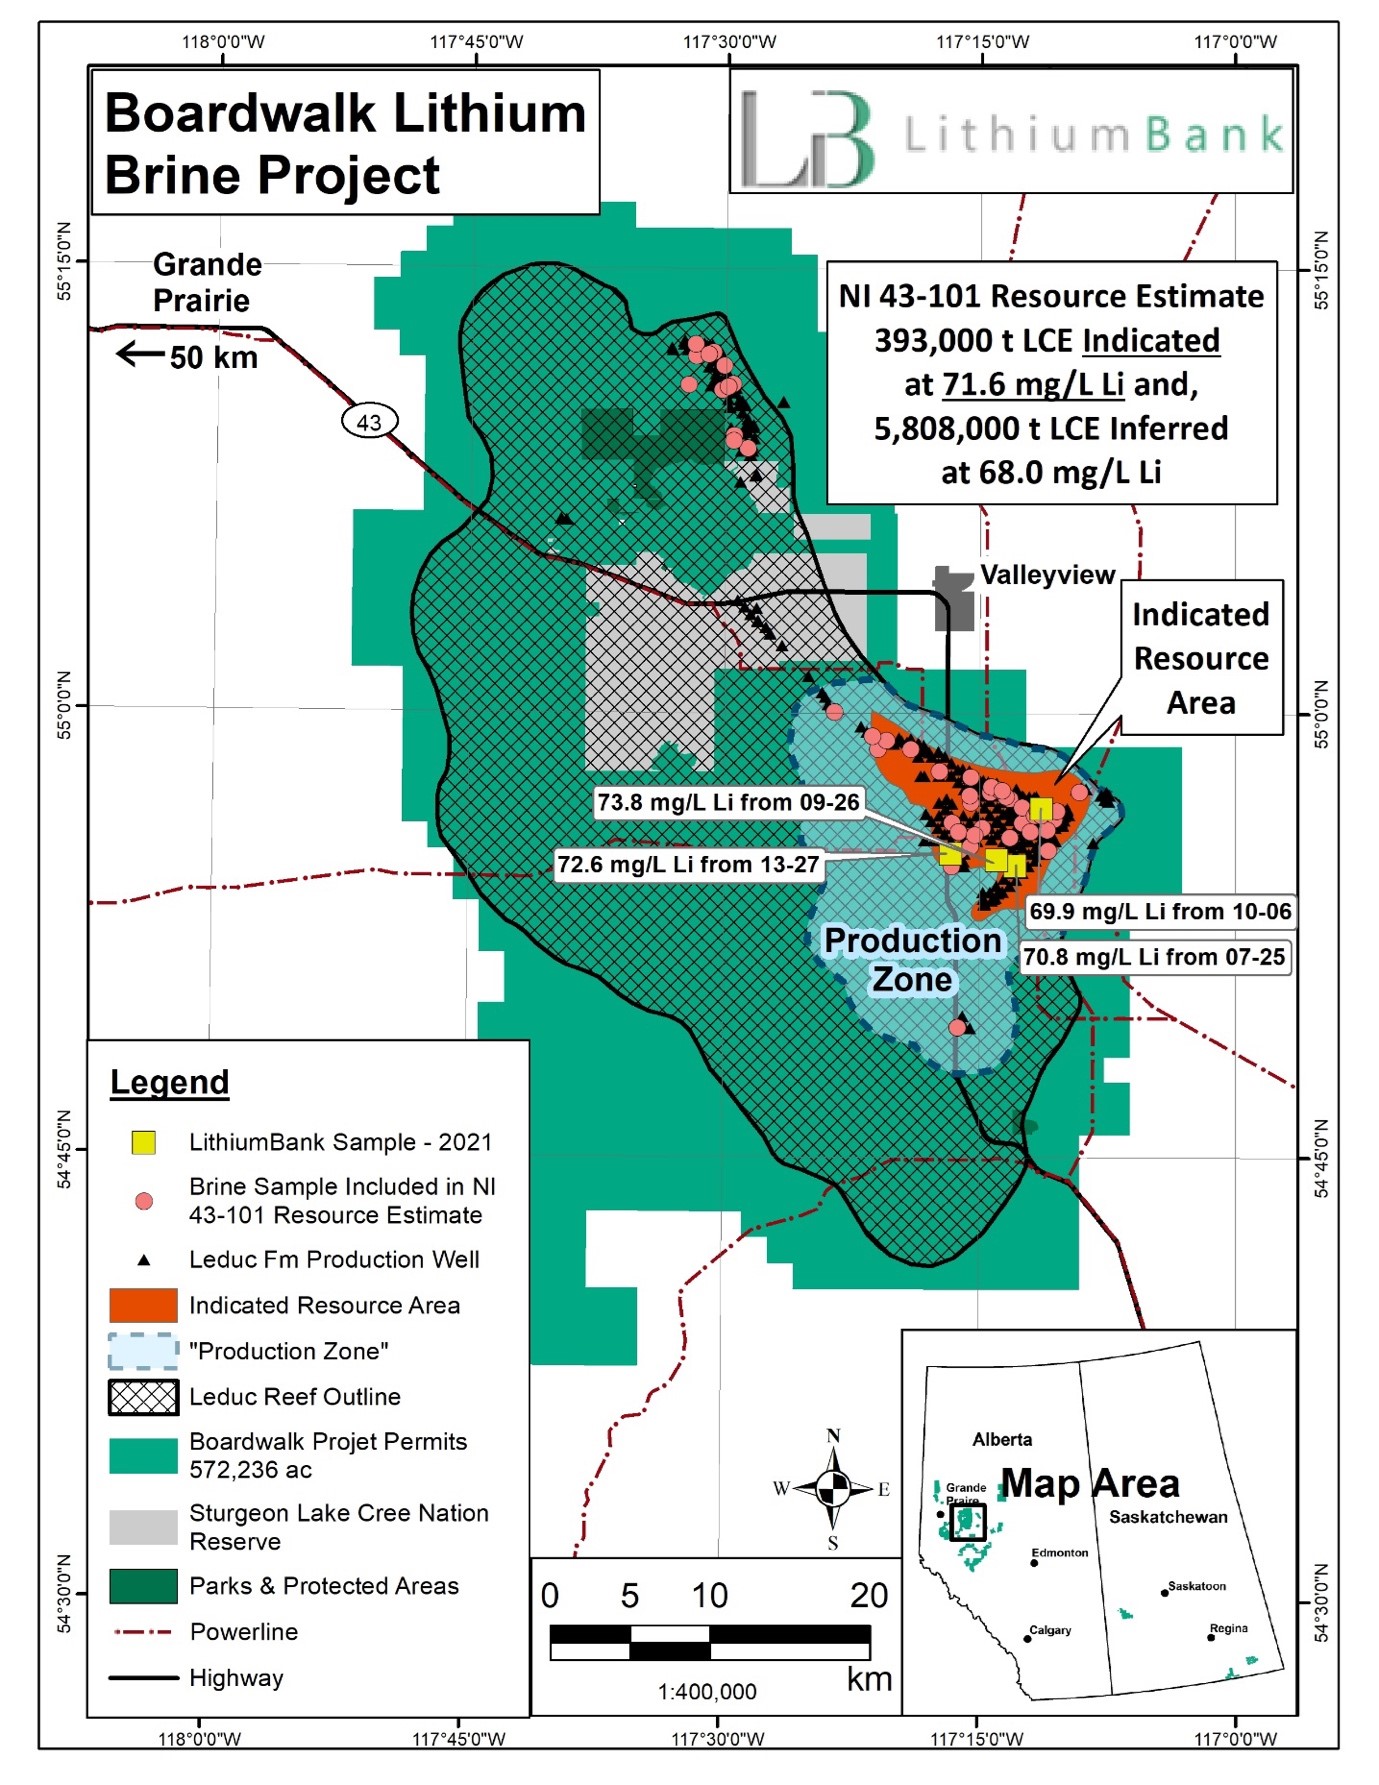 Boardwalk lithium brine project showing the ‘Production Zone'.